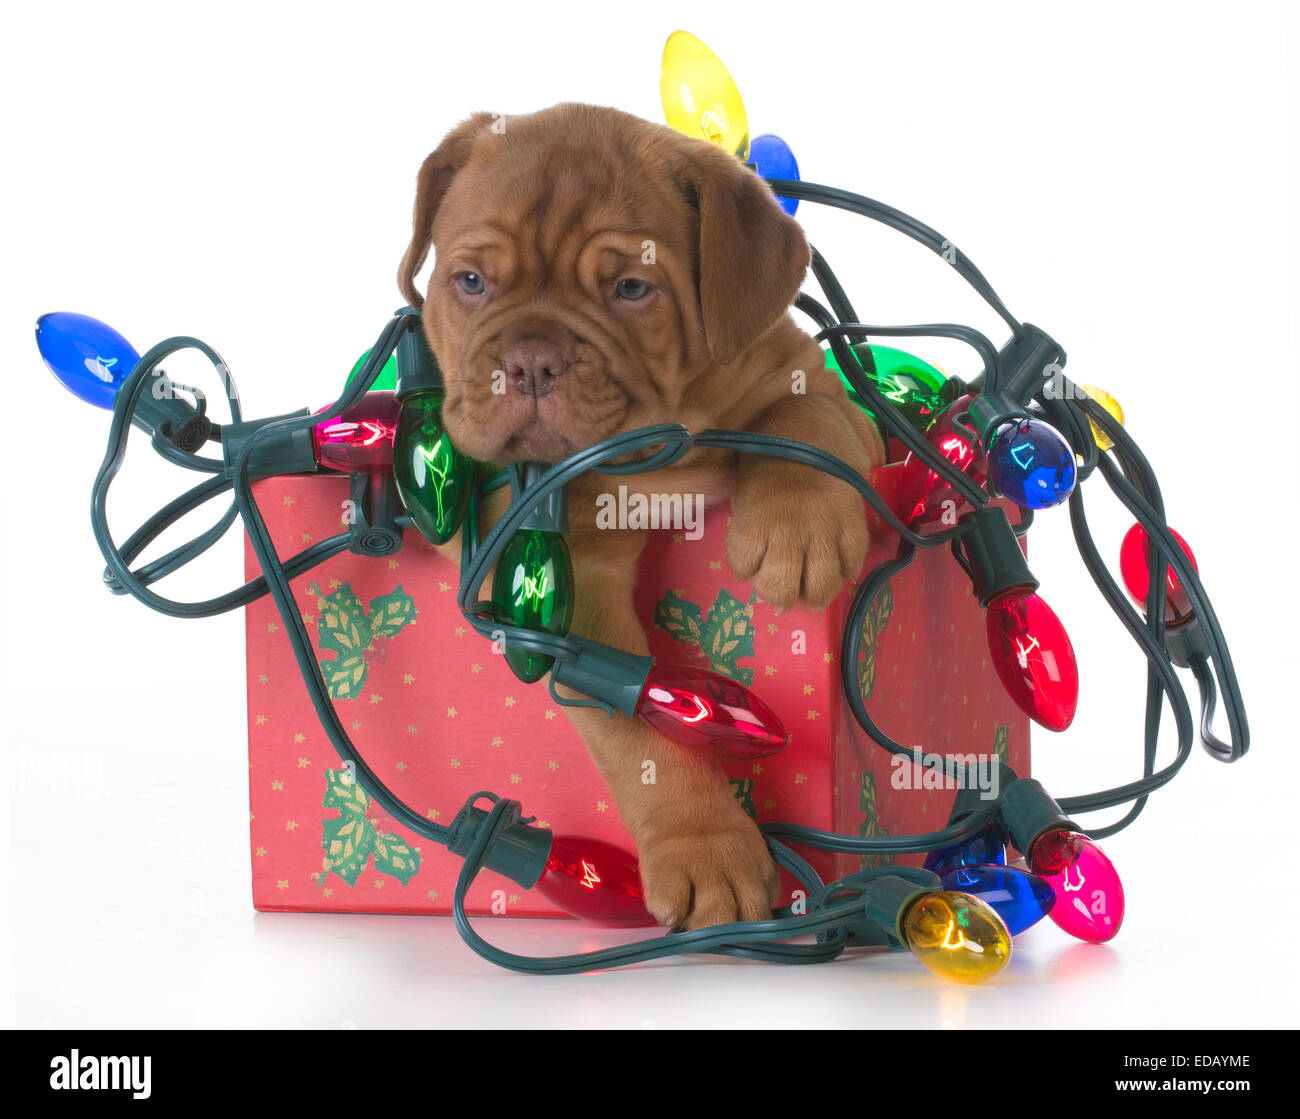 christmas puppy - dogue de bordeaux puppy in a christmas present tangled up in colorful christmas lights on white background Stock Photo